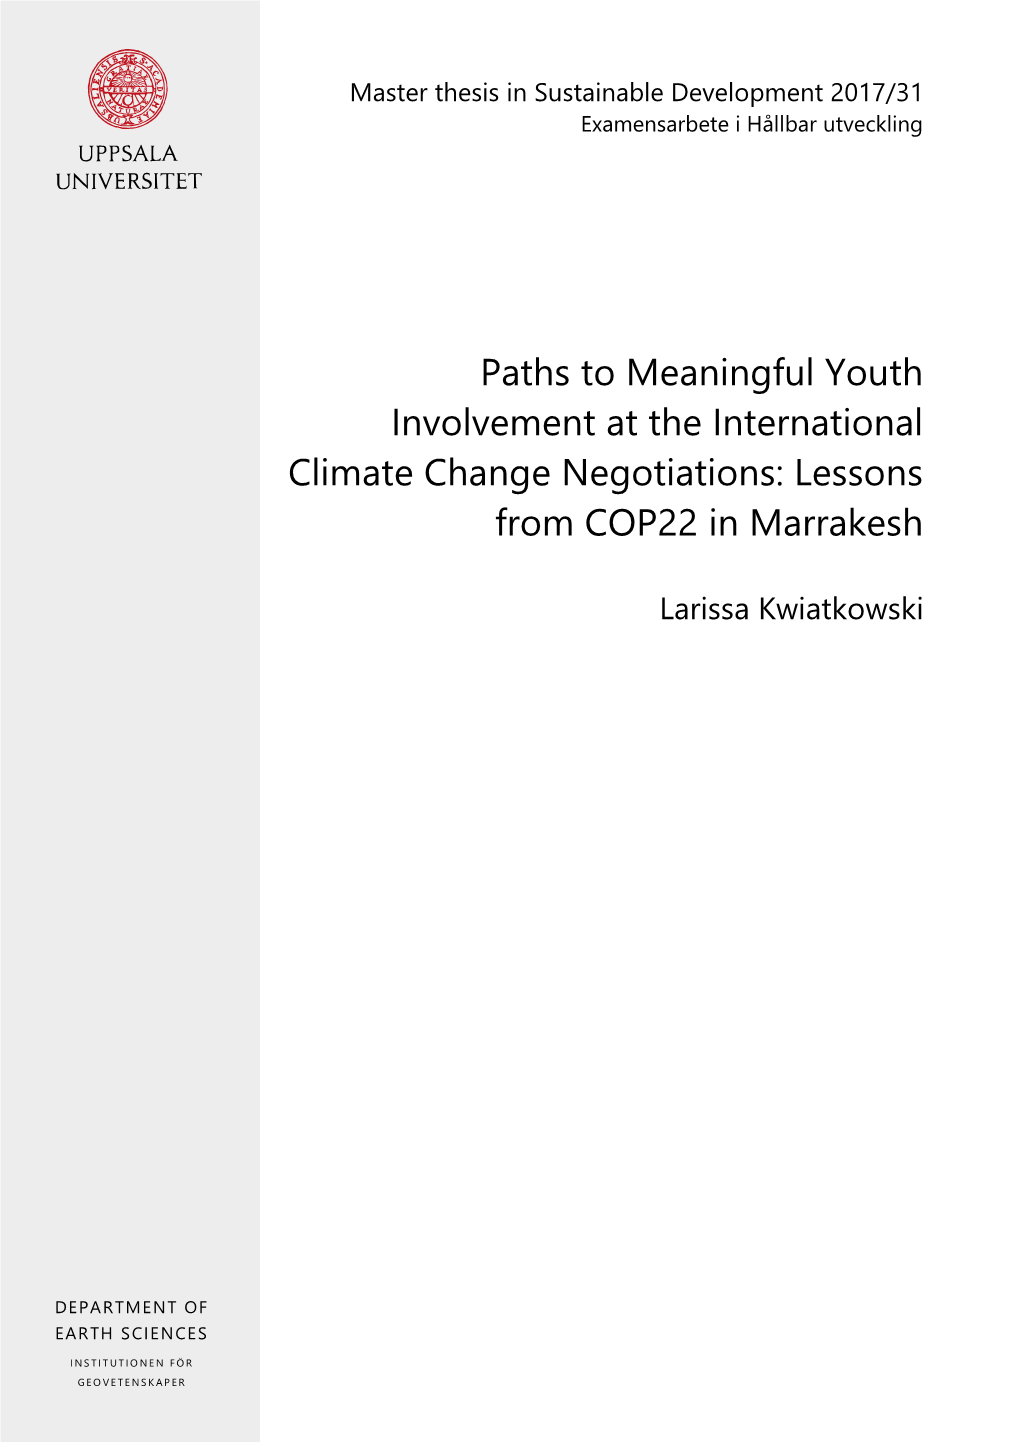 Paths to Meaningful Youth Involvement at the International Climate Change Negotiations: Lessons from COP22 in Marrakesh